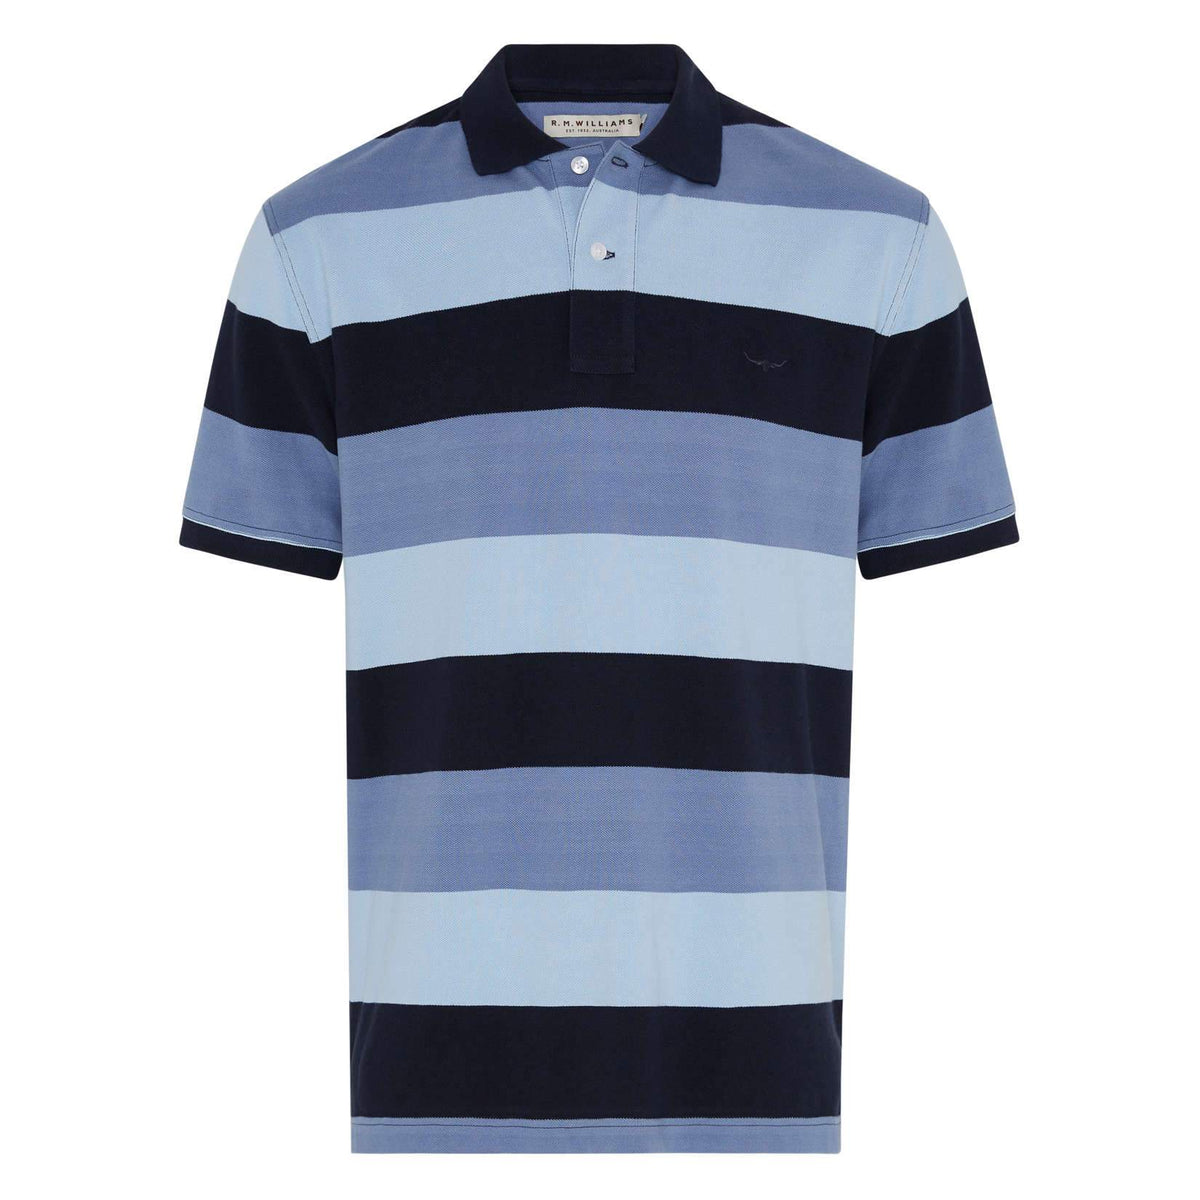 Men's Polo Shirts – Cooneys Clothing & Footwear